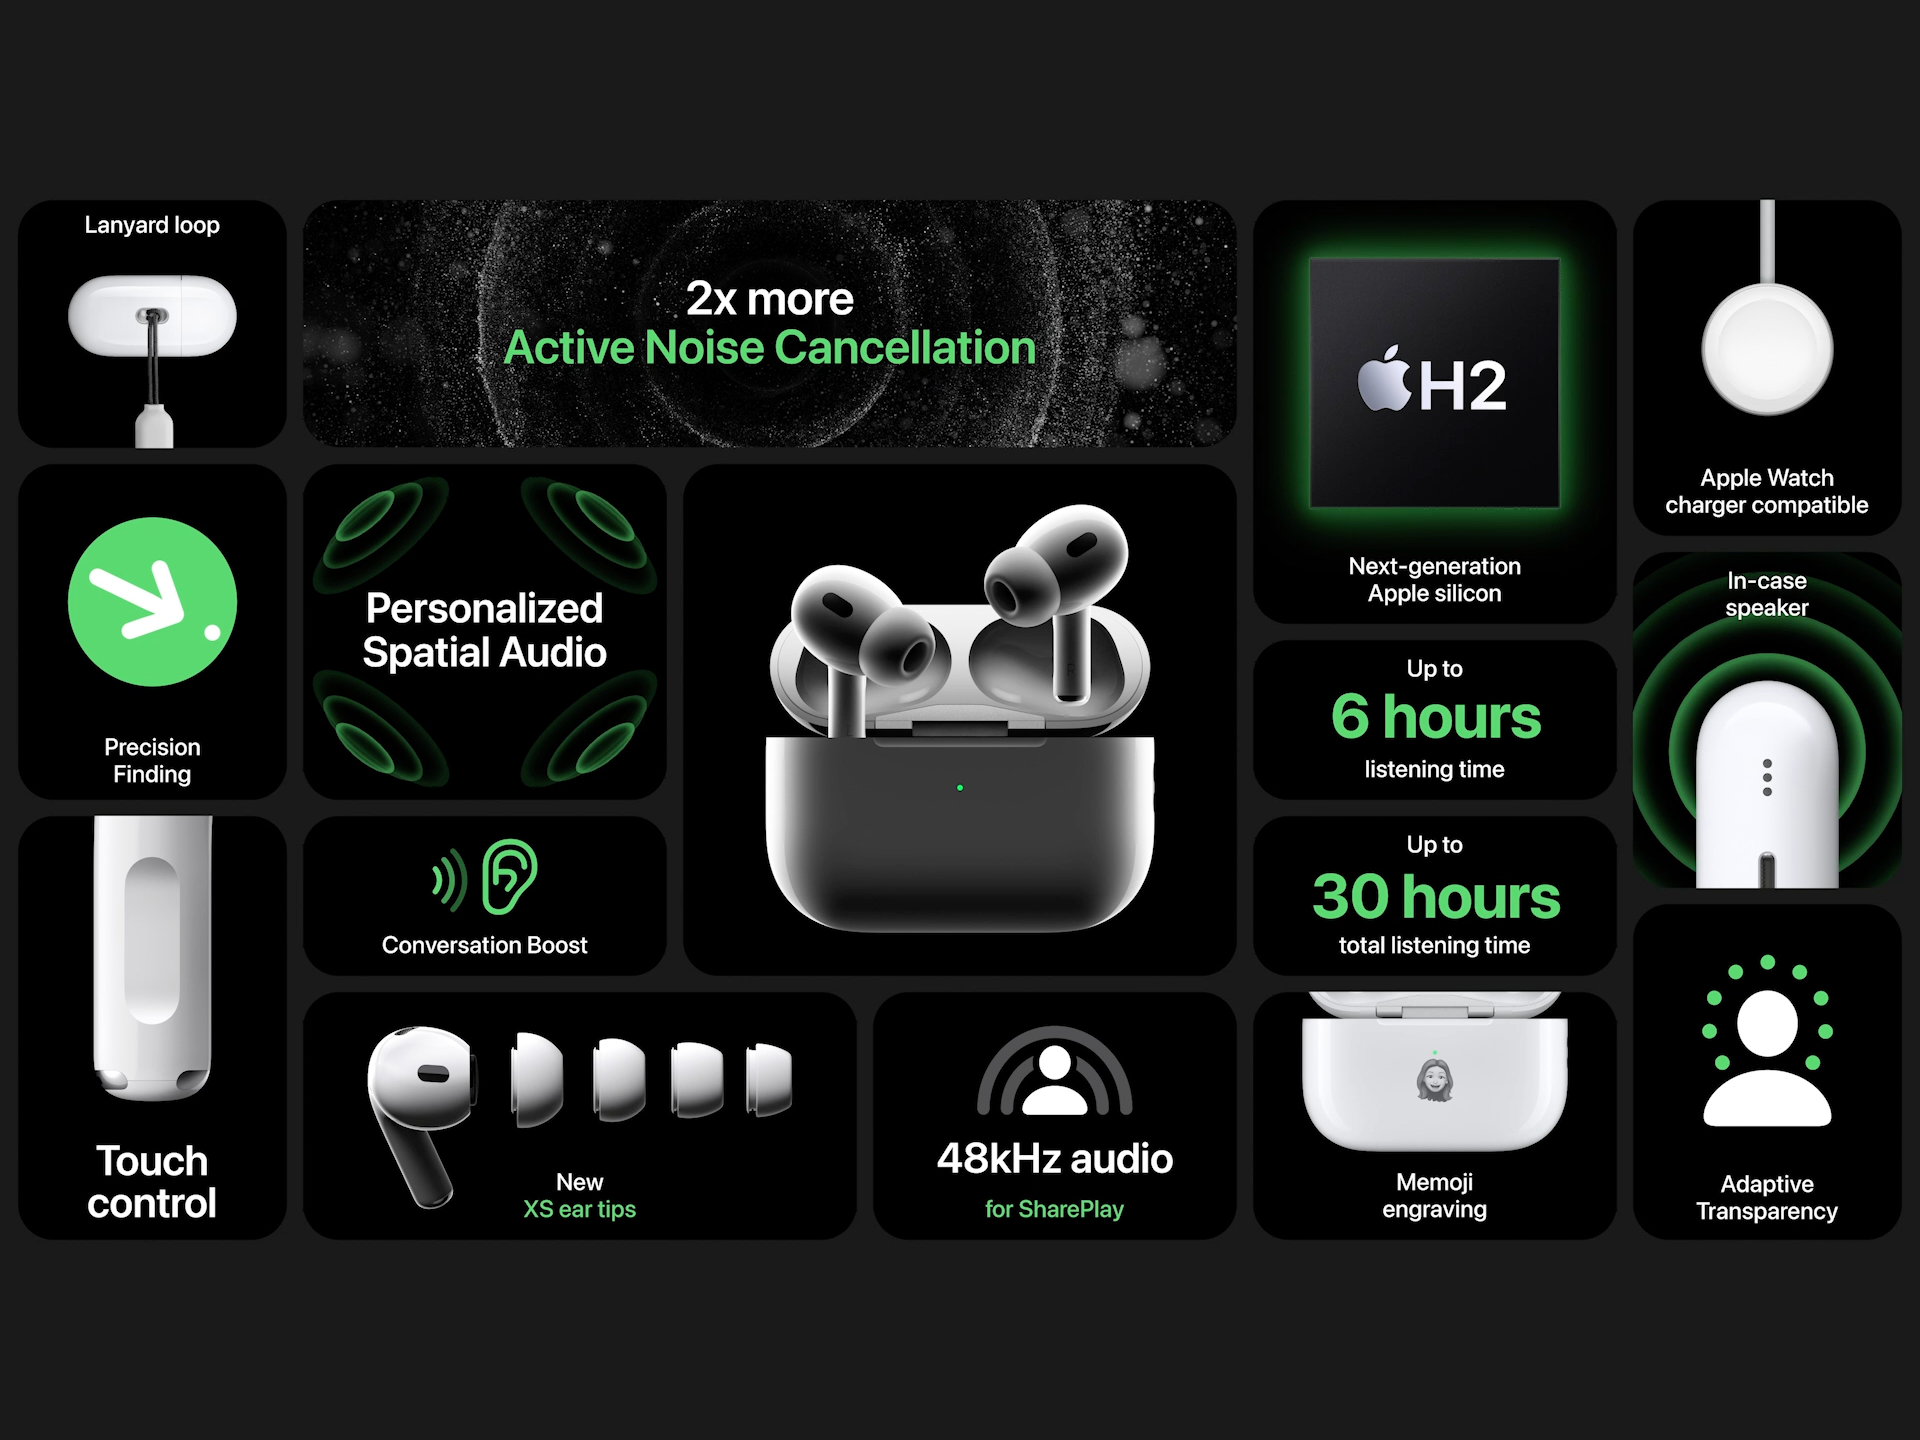 Airpods 2 чип. Apple AIRPODS Pro 2. Наушники Apple AIRPODS Pro 2nd Generation. Apple AIRPODS Pro 2 2022. Наушники Air pods Pro 2.